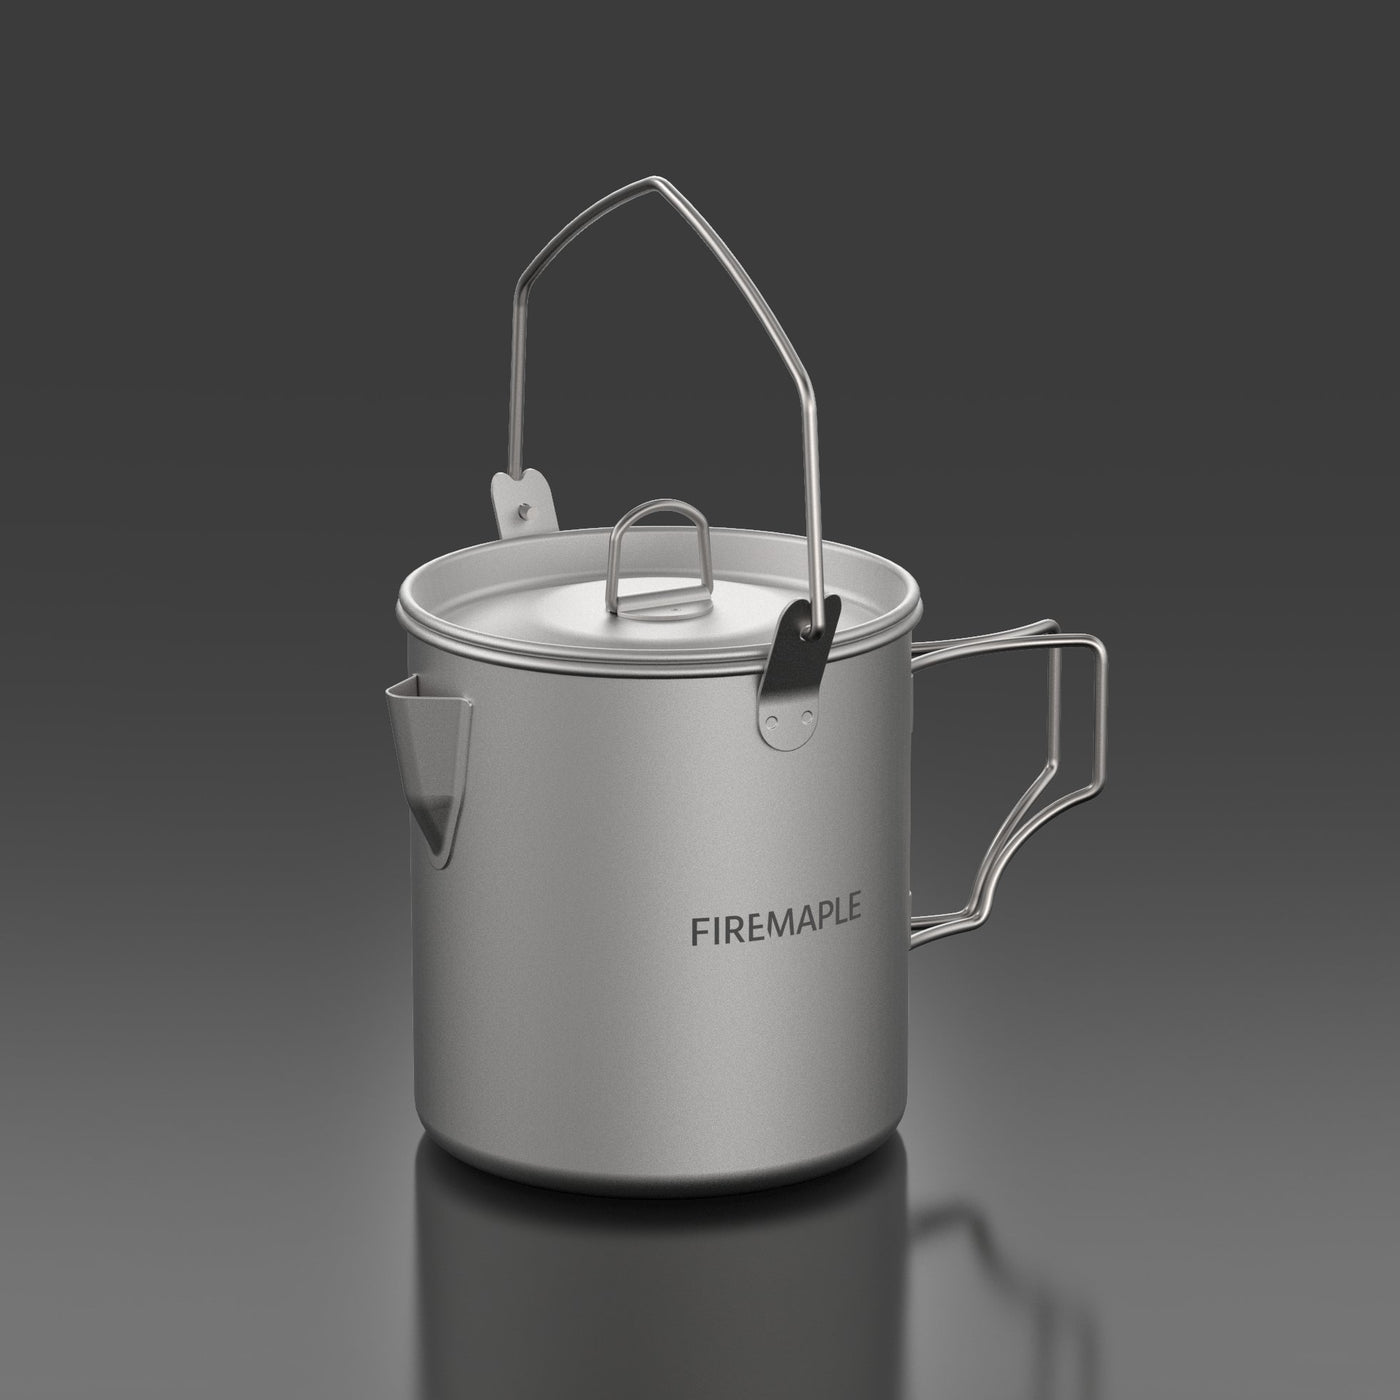 FireMaple Alti: Lightweight Camping – Mug for Backpacking Maple Titanium Fire